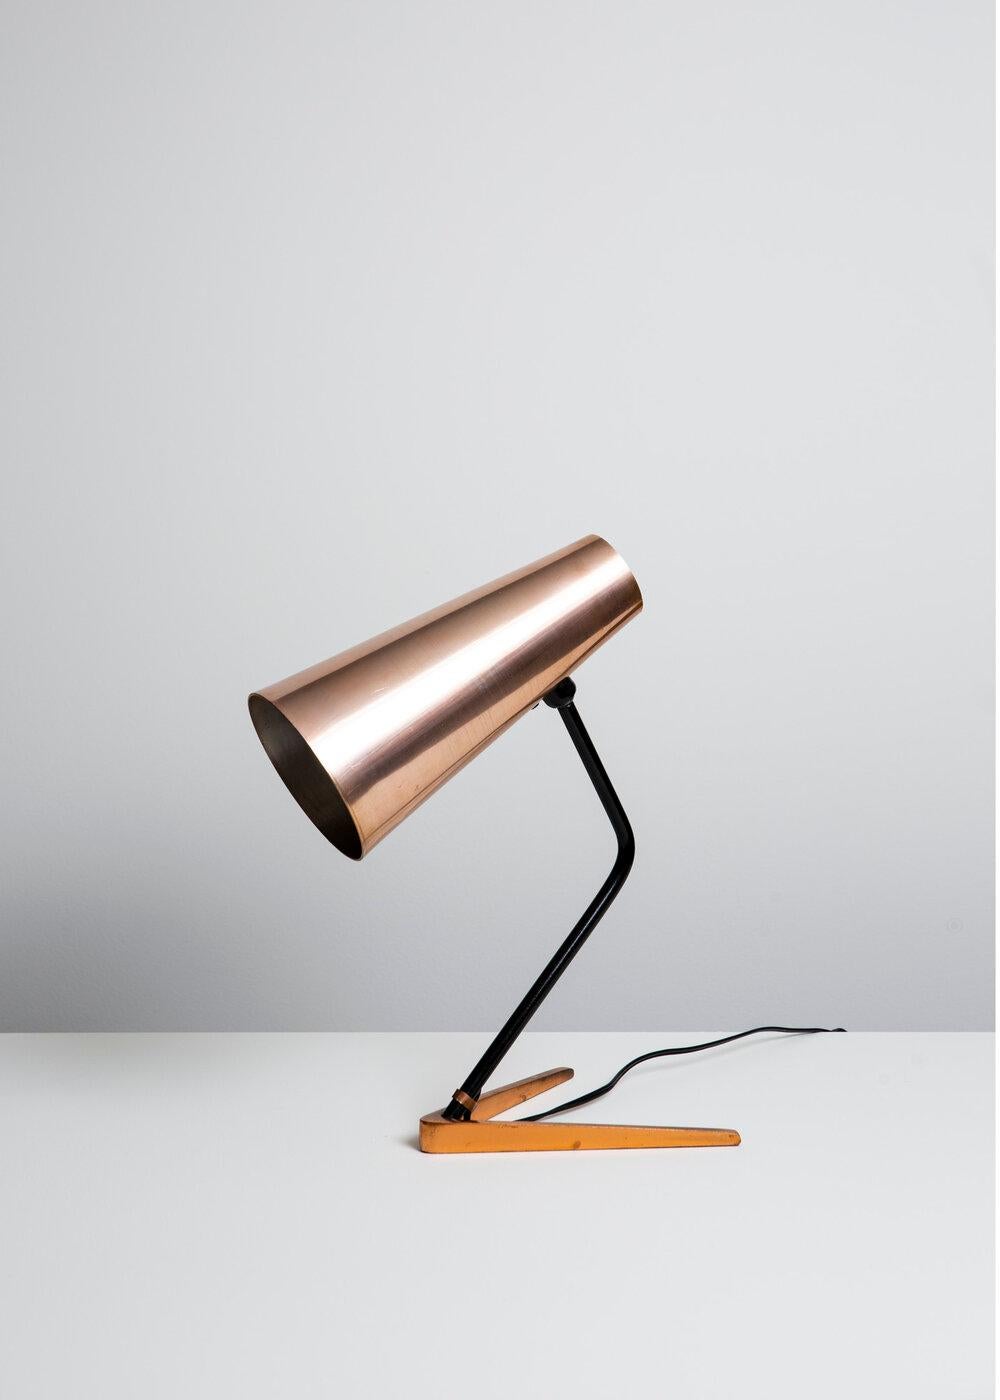 Stilux Milano table lamp manufactured in the 1950s. Copper anodised aluminium cone shade, enamelled steel pivot and stem, copper plated V shaped steel foot. 60 watts E-26 Edison medium base incandescent bulb recommended or higher if LED/CFL.
Rewired